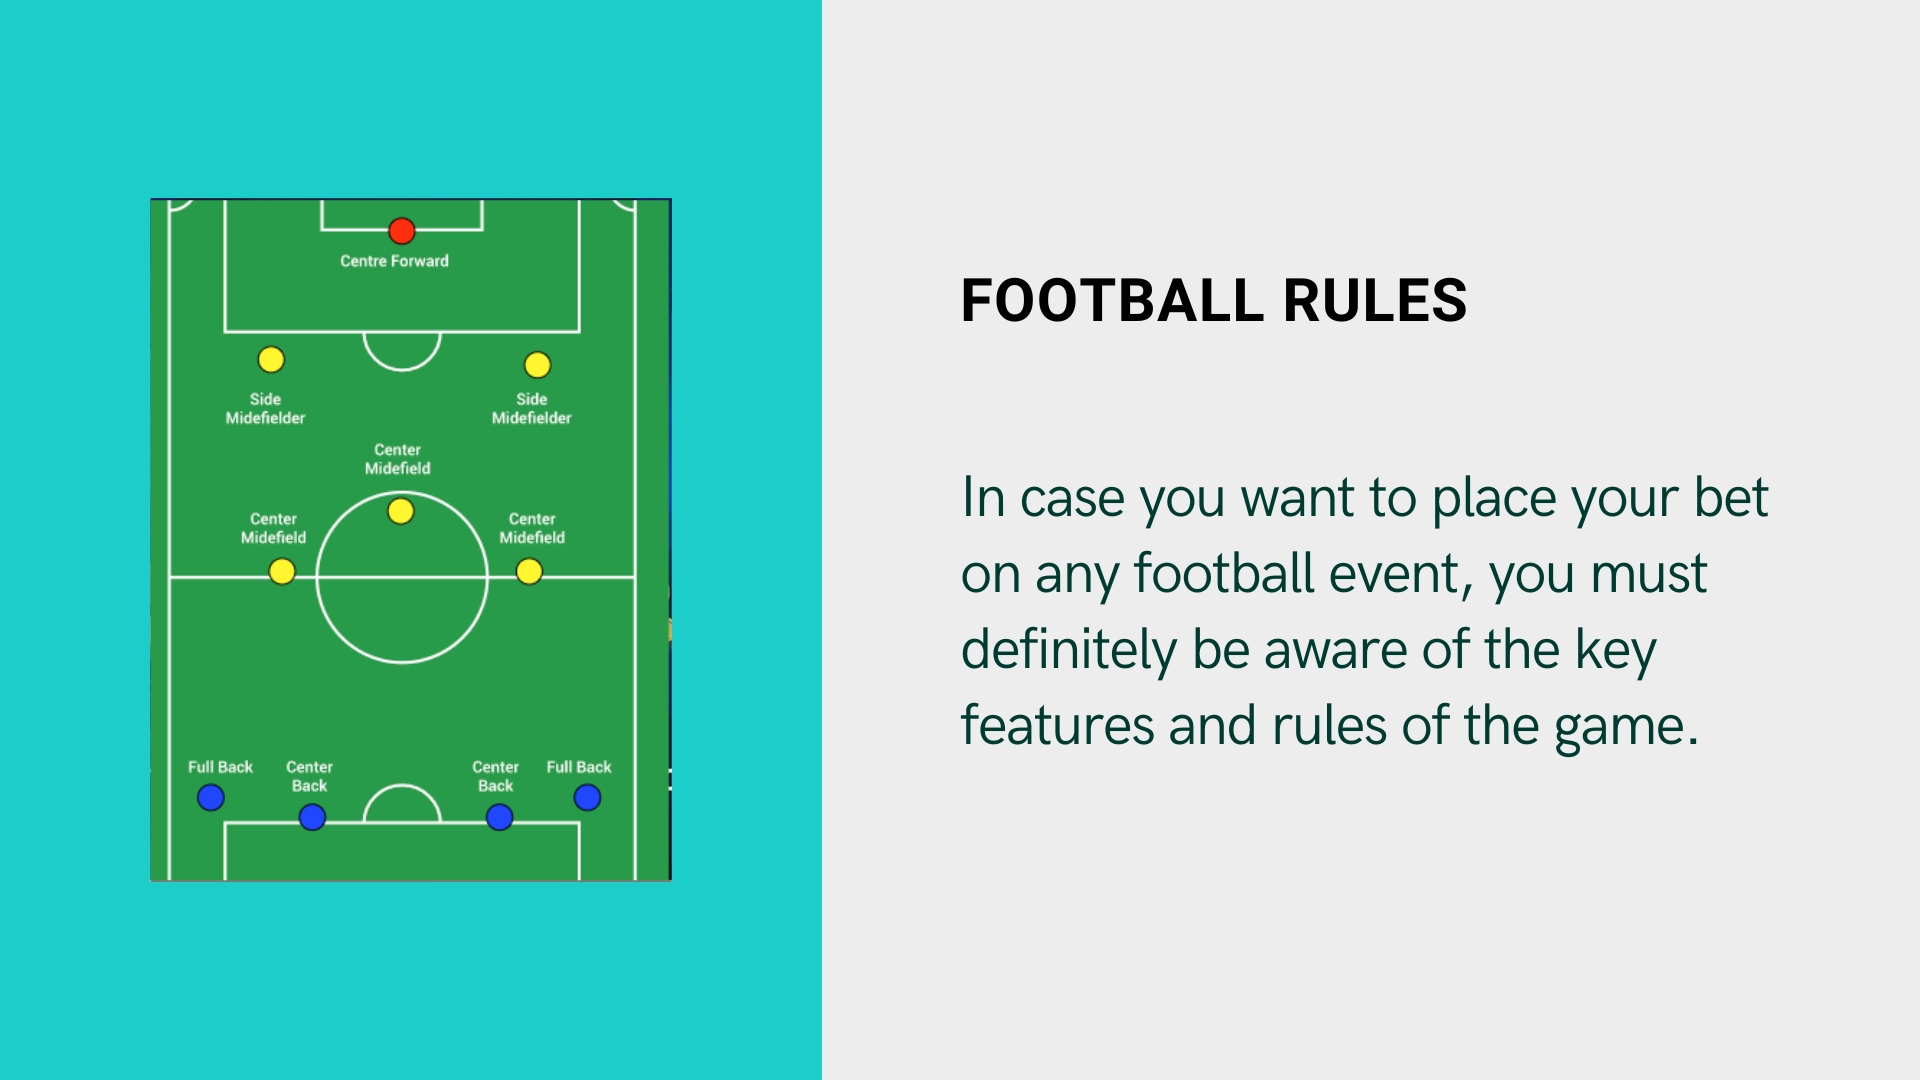 Football rules and regulations essential for efficient betting